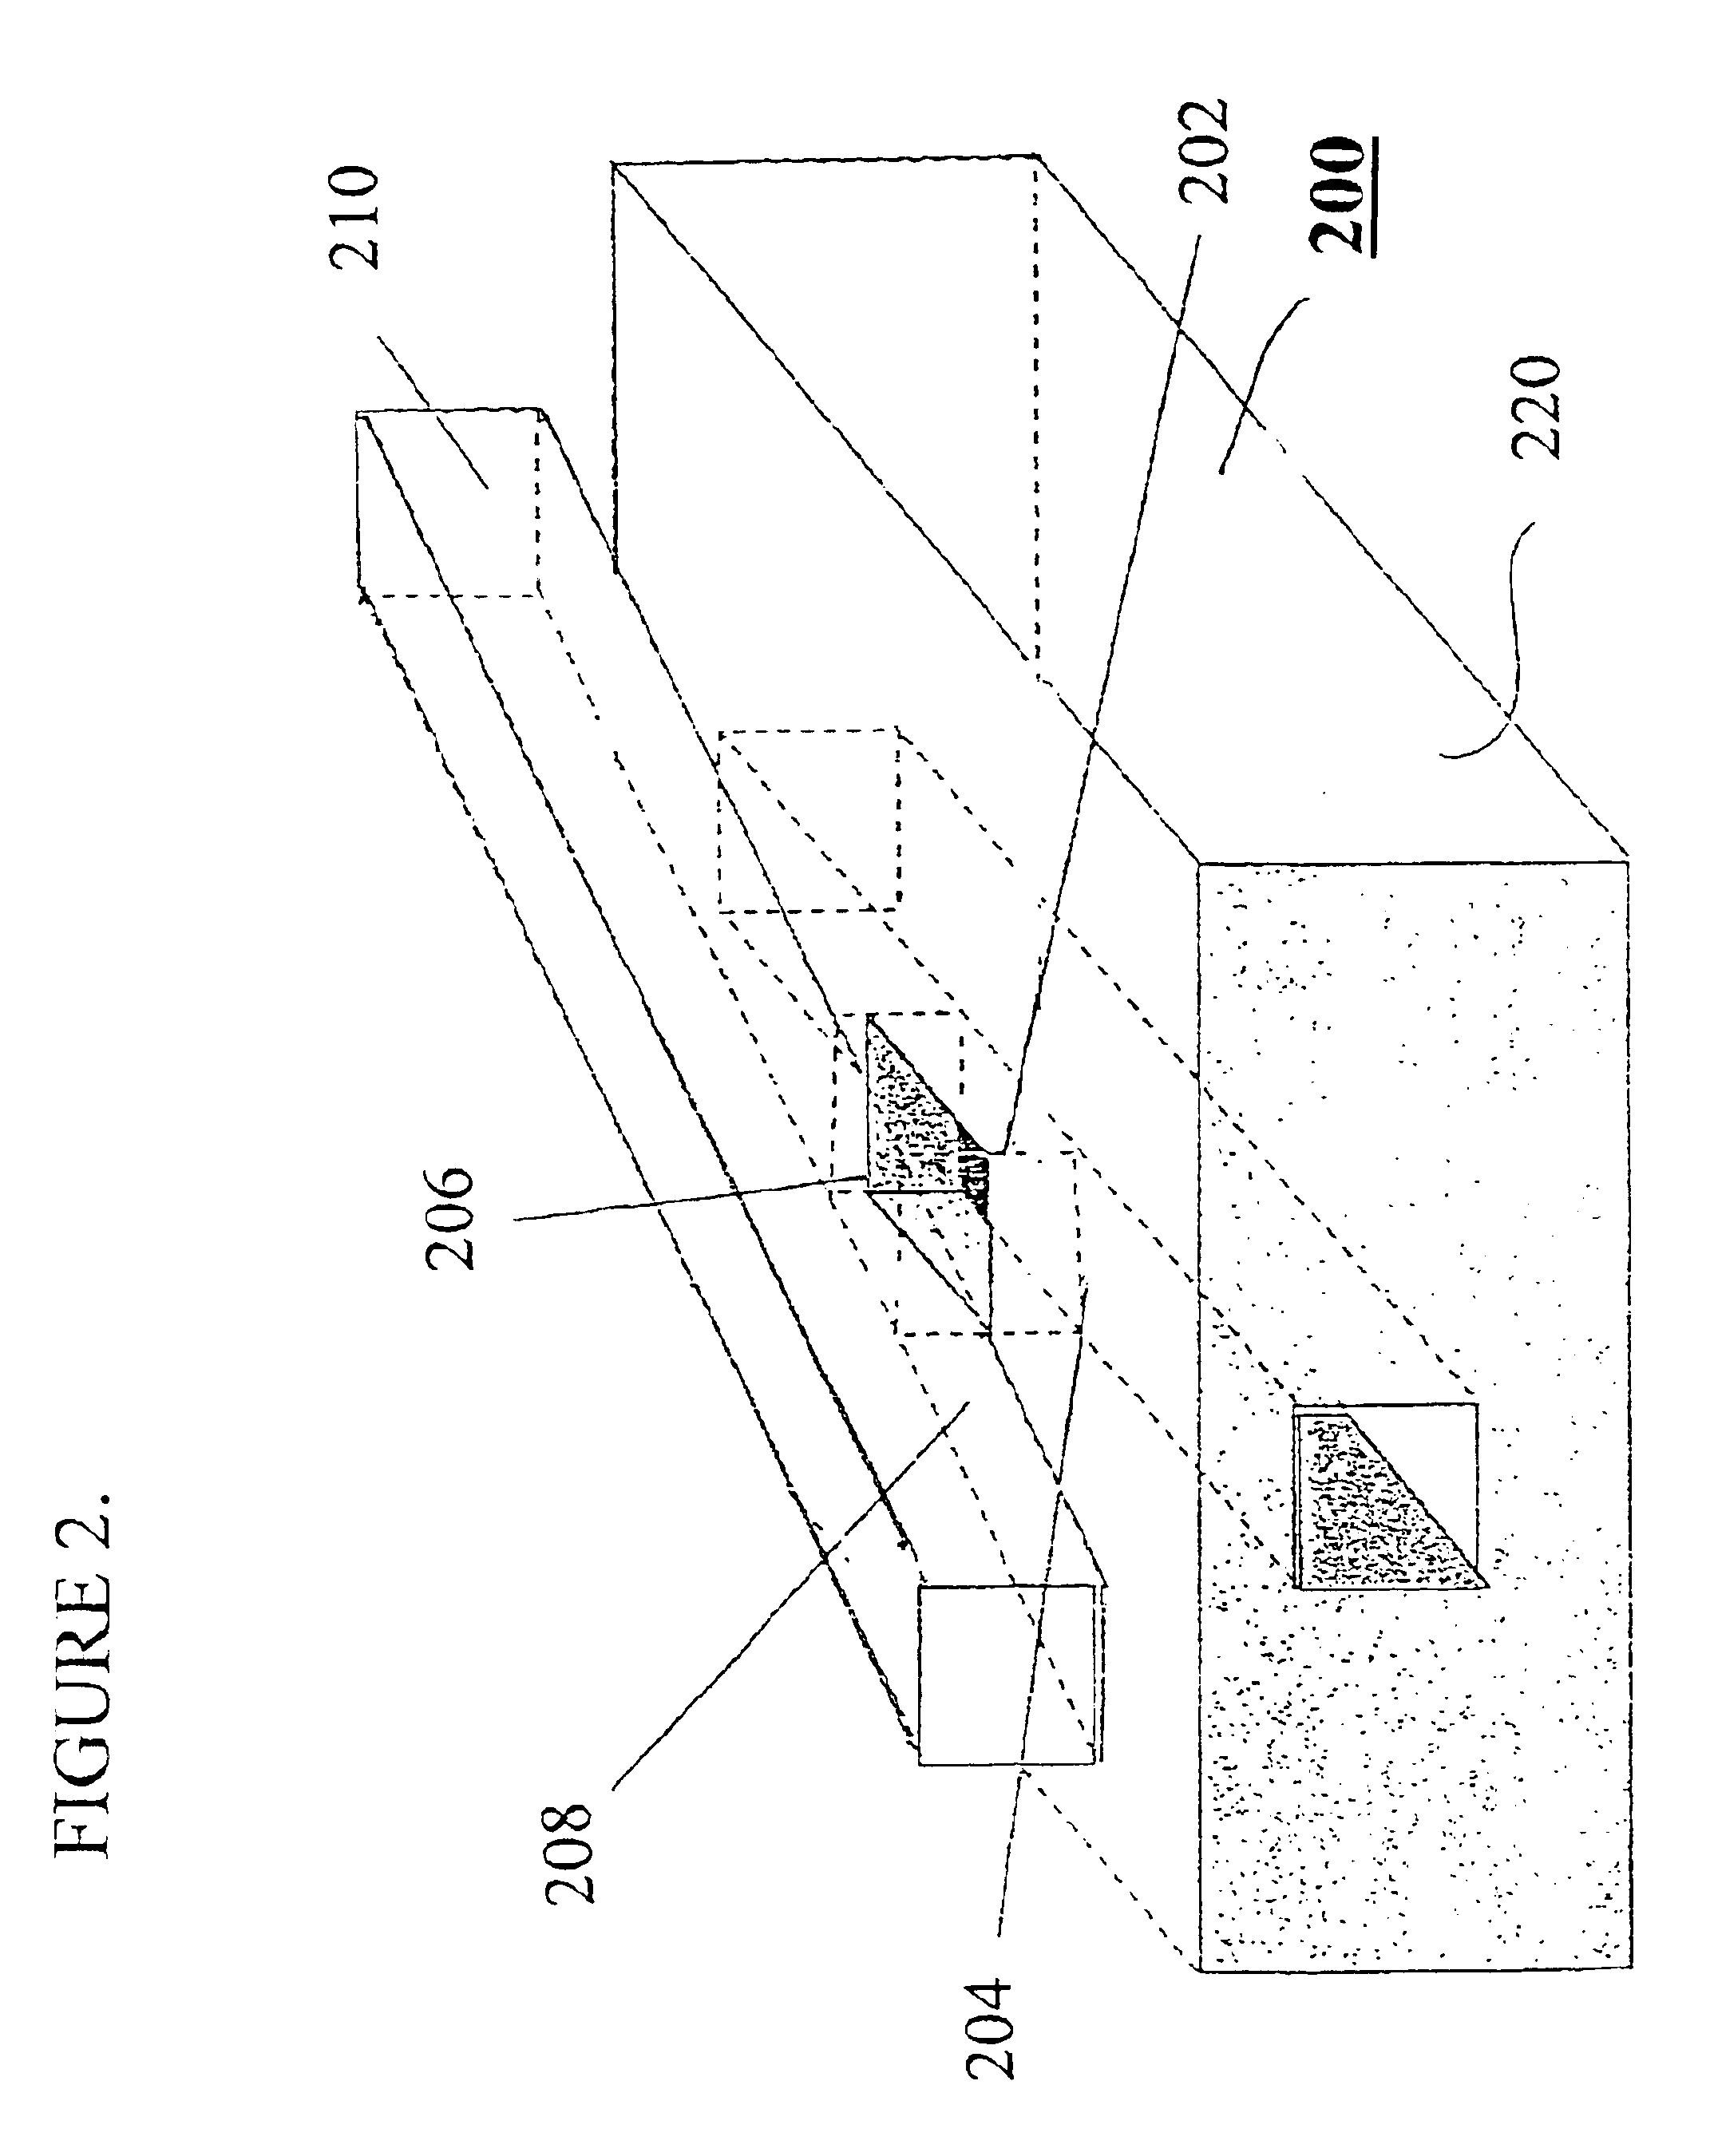 Optical switching system based on hollow waveguides